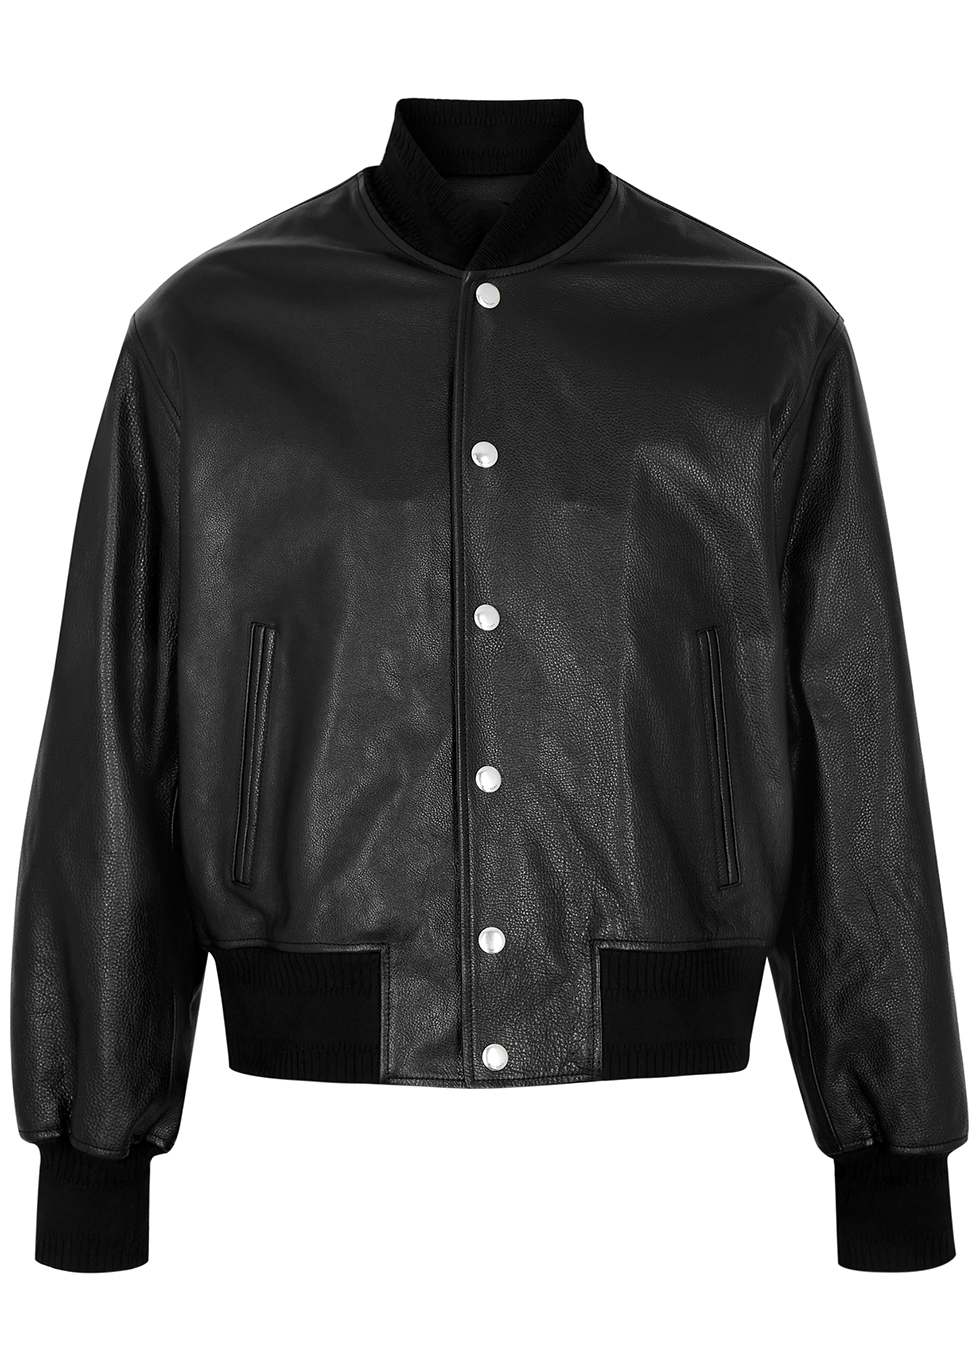 Givenchy Black hooded leather and jersey jacket - Harvey Nichols